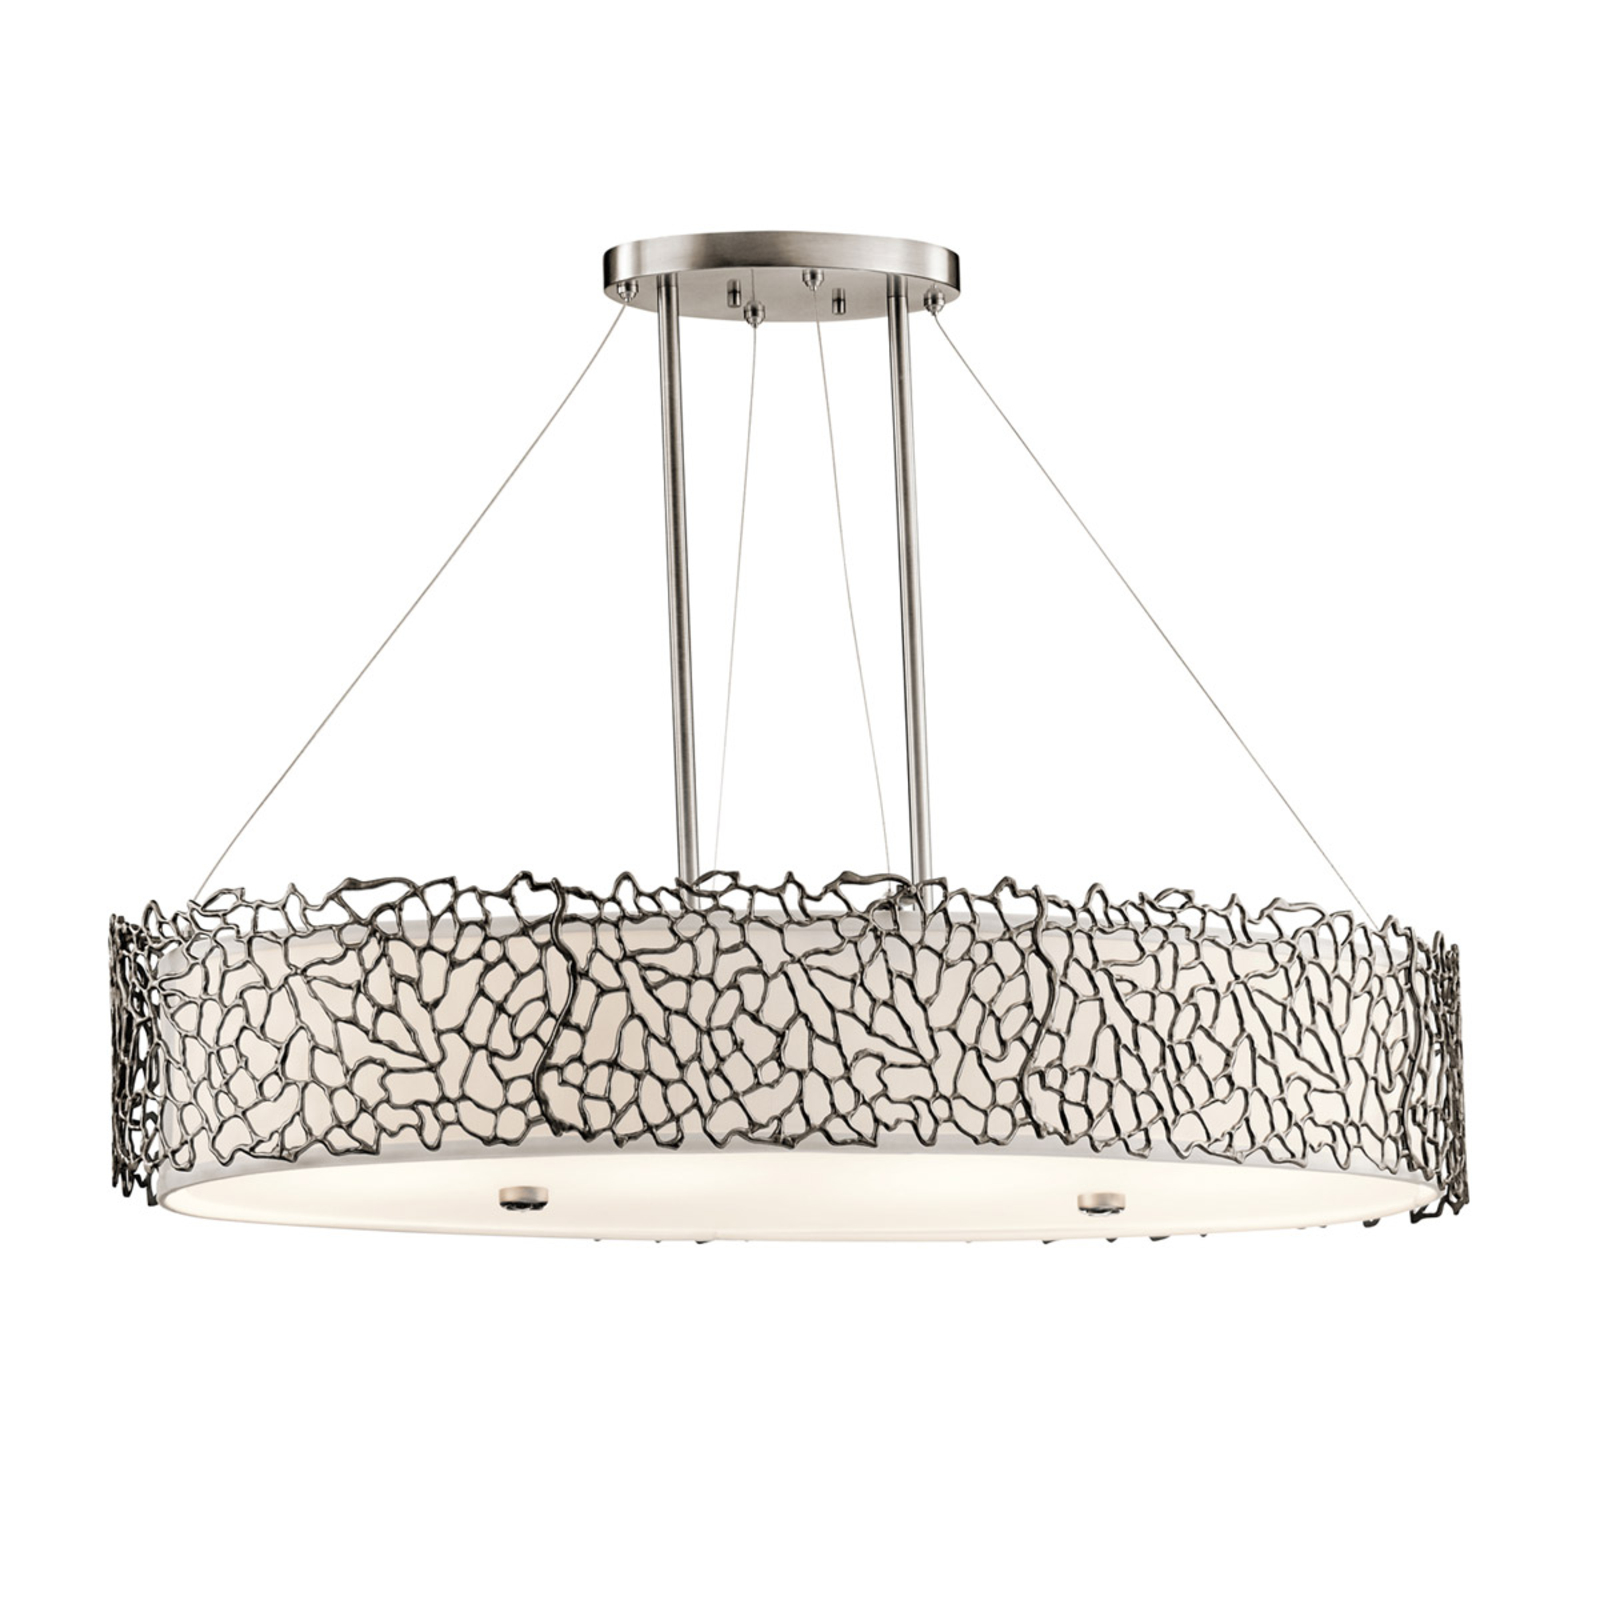 Silver Coral oval pendant light